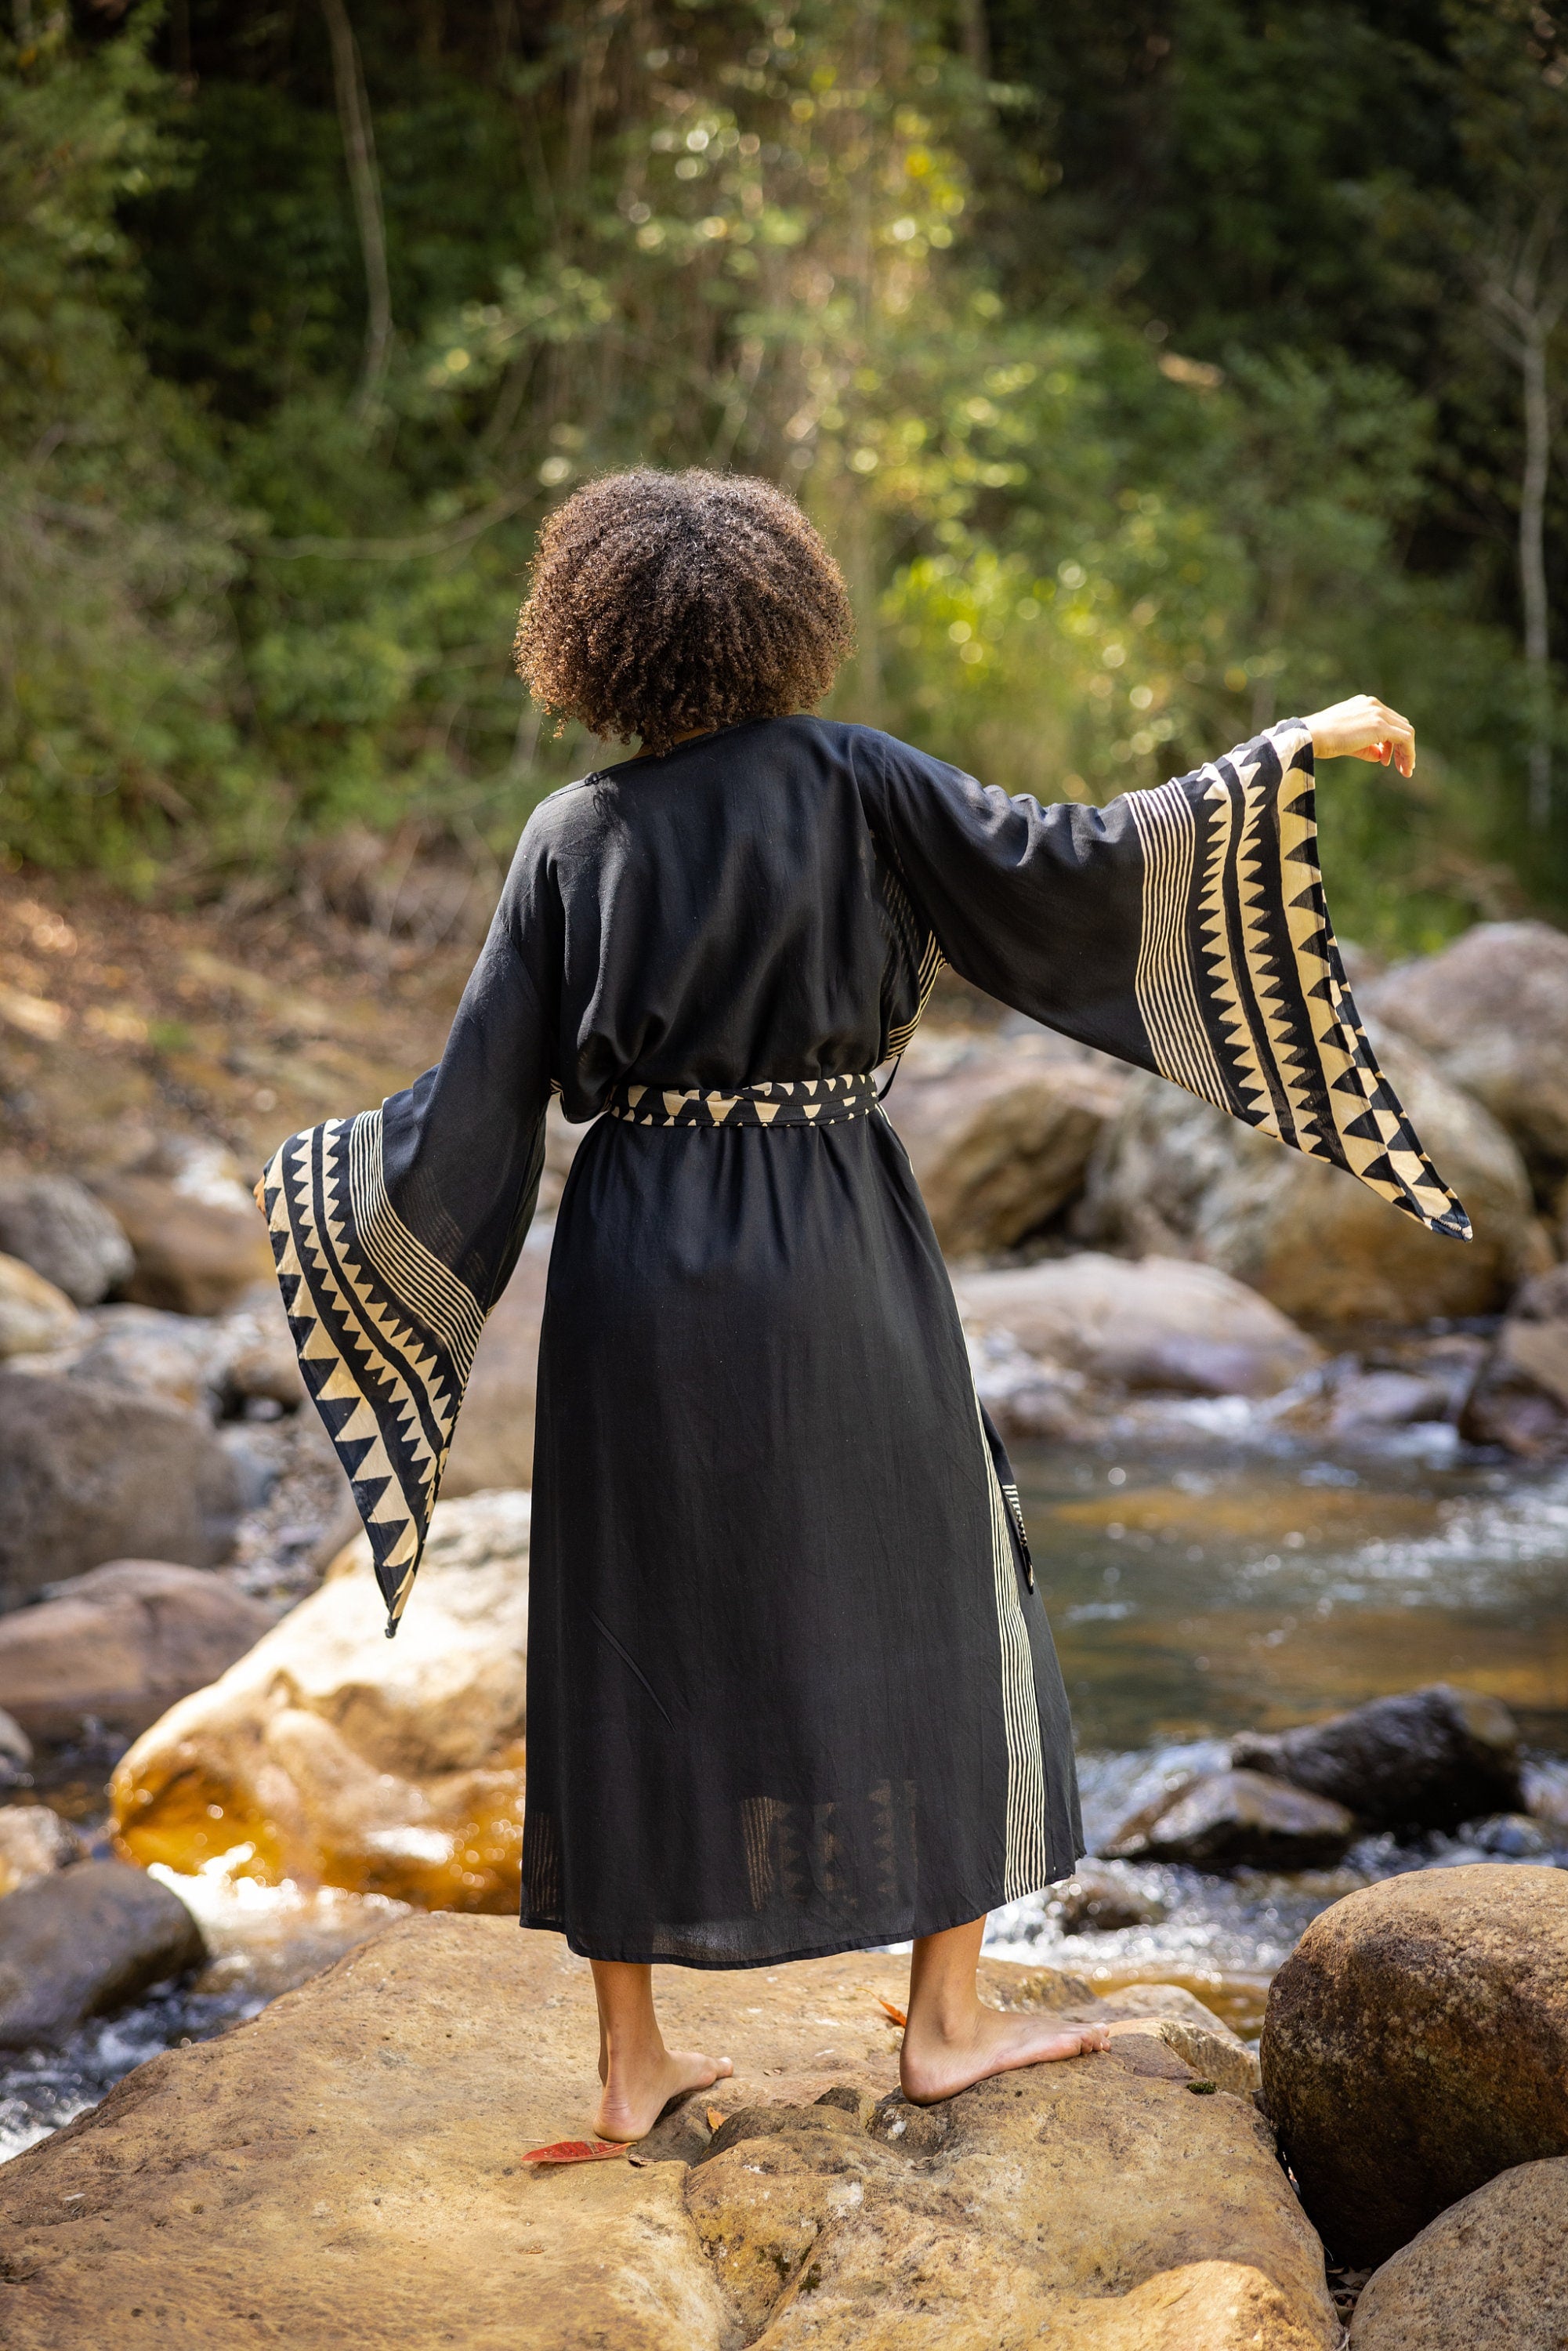 Introducing the ELGA kimono robe, the unique blend of comfort and style. Made from a super soft, breathable rayon-cotton fabric, this robe is designed for ultimate comfort and ease of movement.